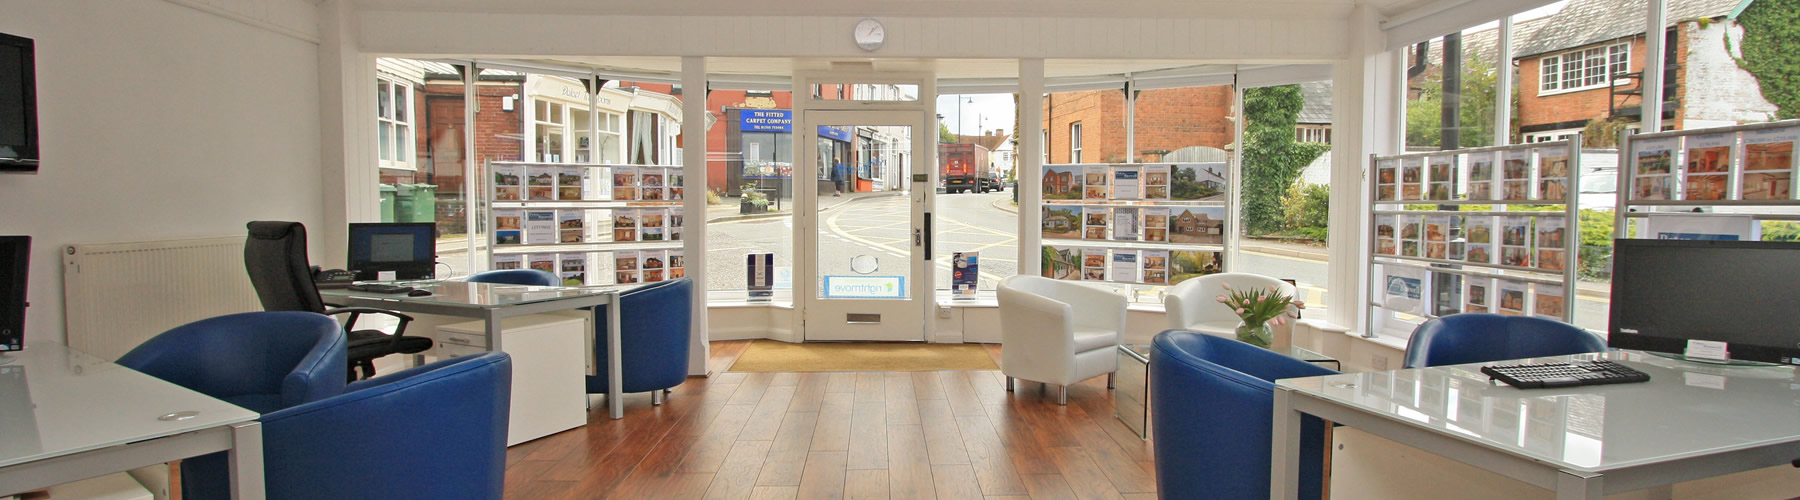 Peter Buswell Estate Agents